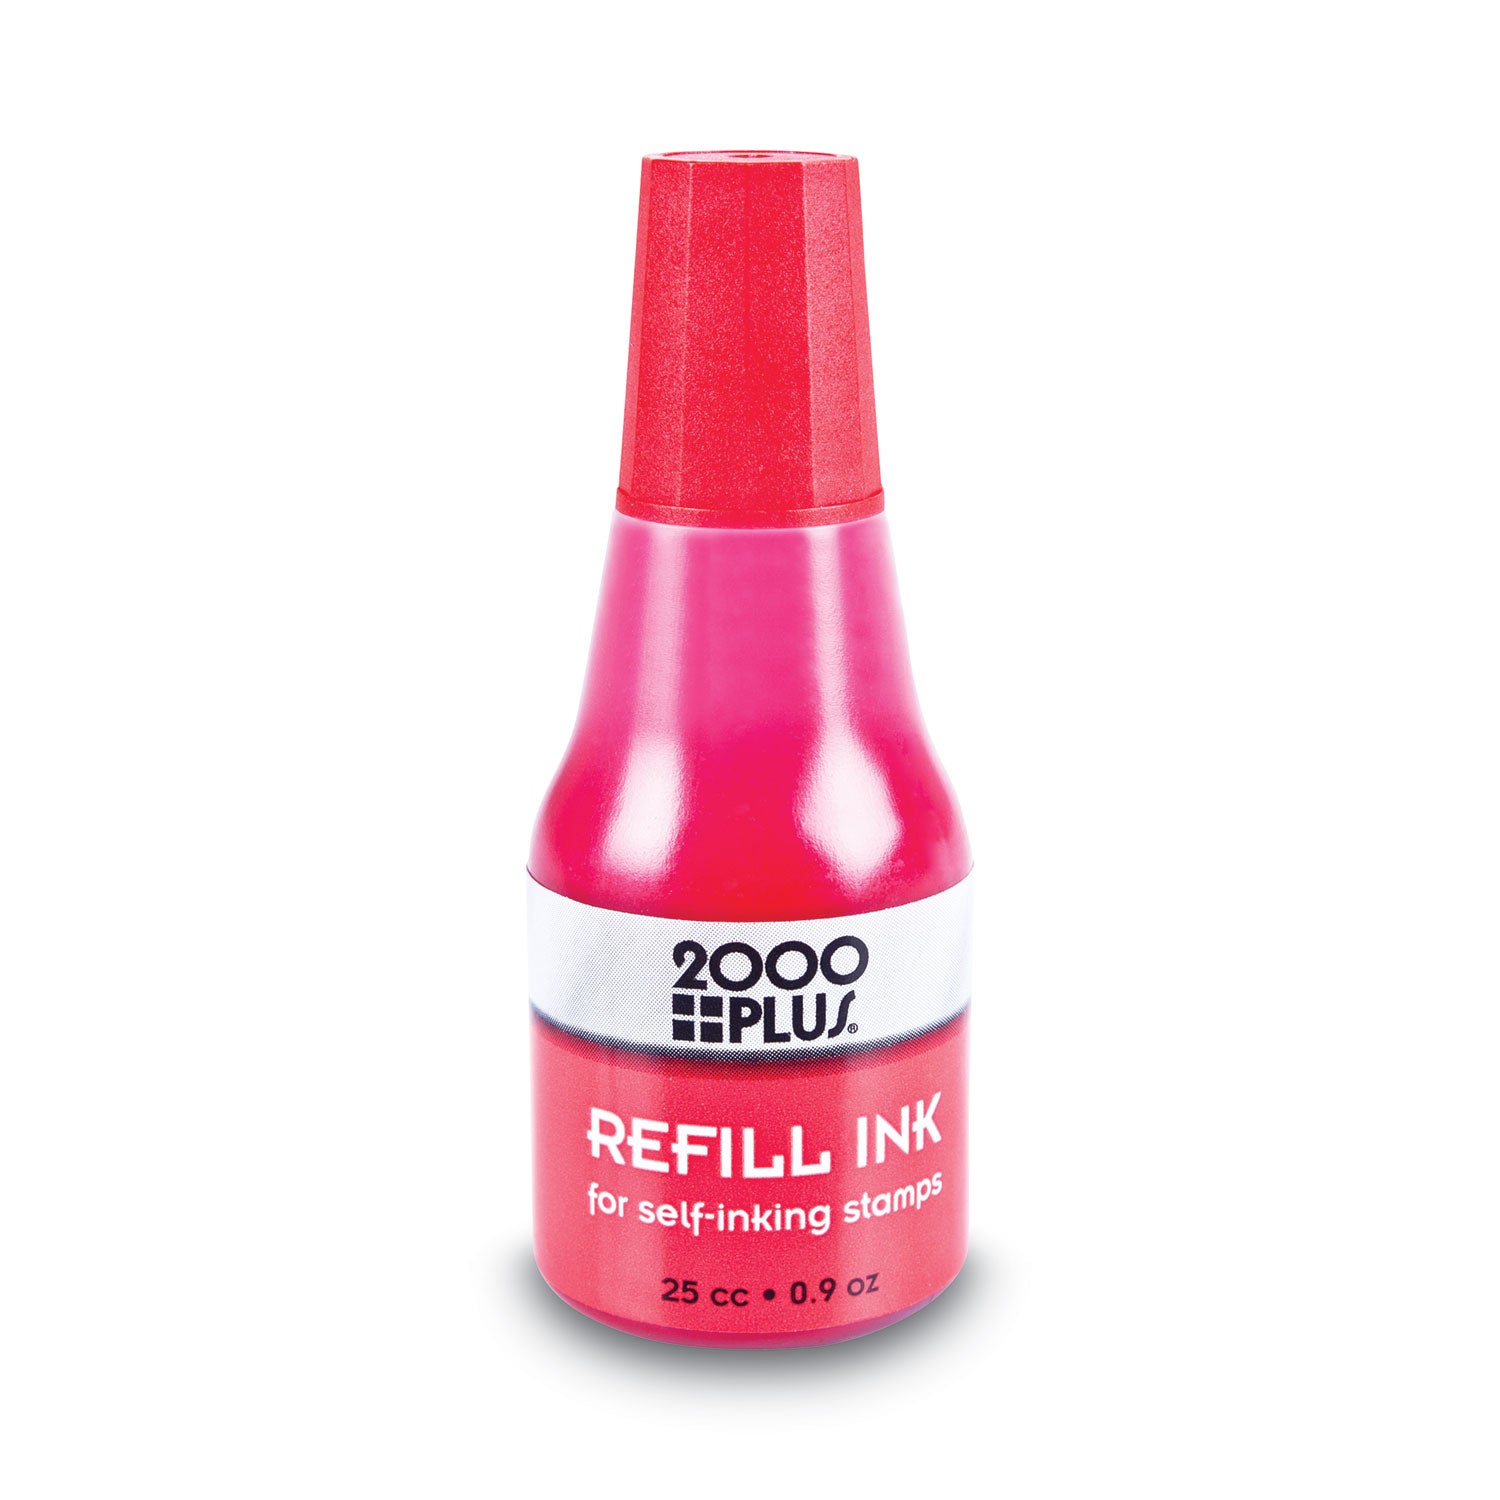 Self-Inking Refill Ink, 0.9 oz. Bottle, Red - 